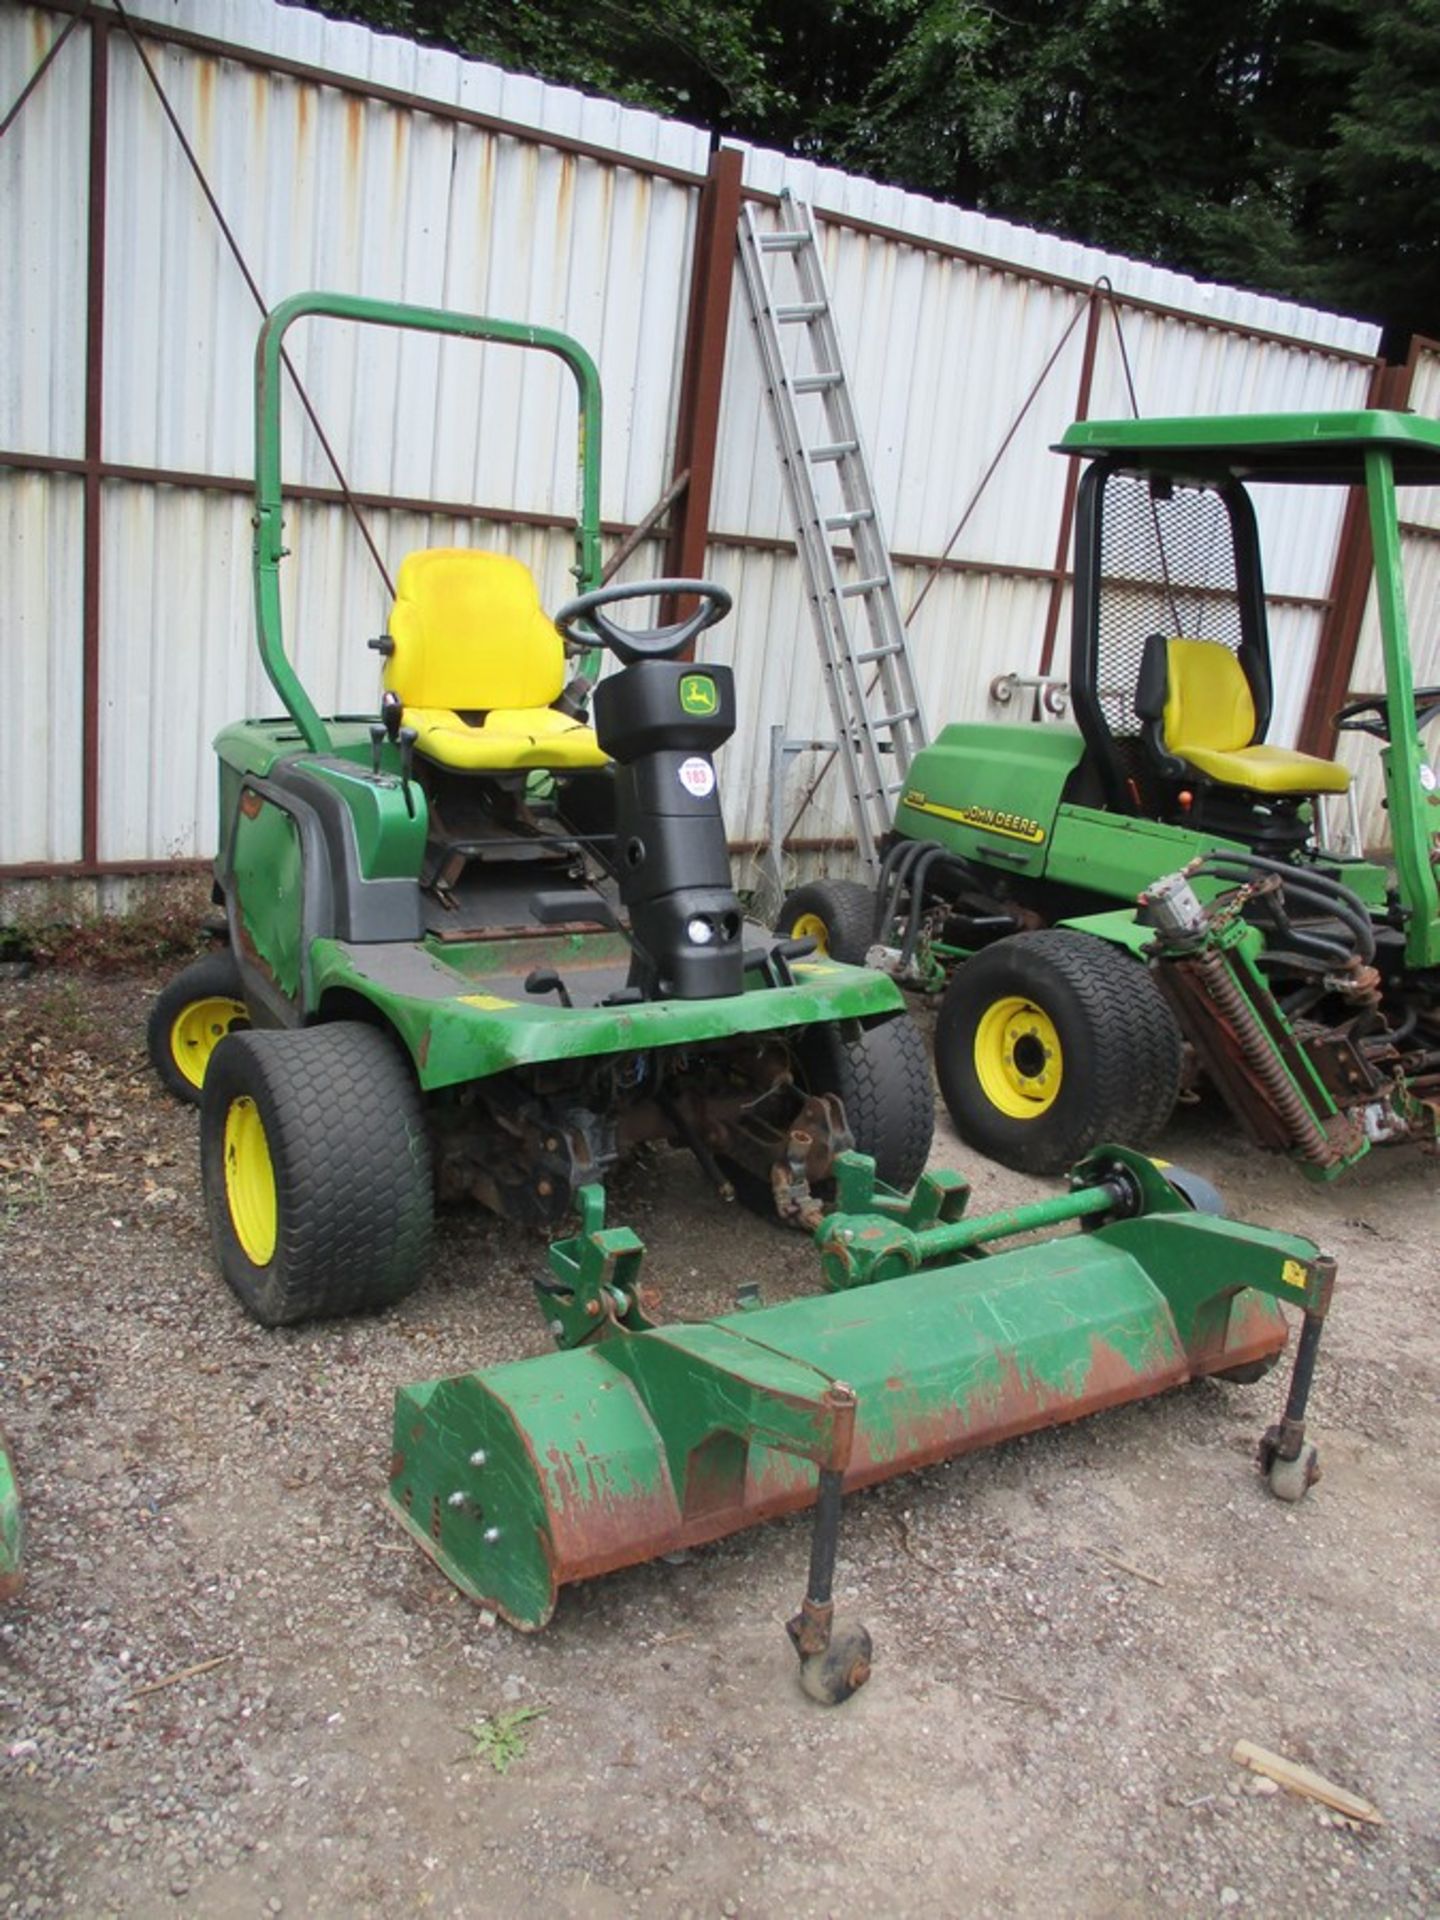 JOHN DEERE 1400 SERIES 4WD DIESEL C.W MAJOR OUTFRONT FLAIL - Image 2 of 5